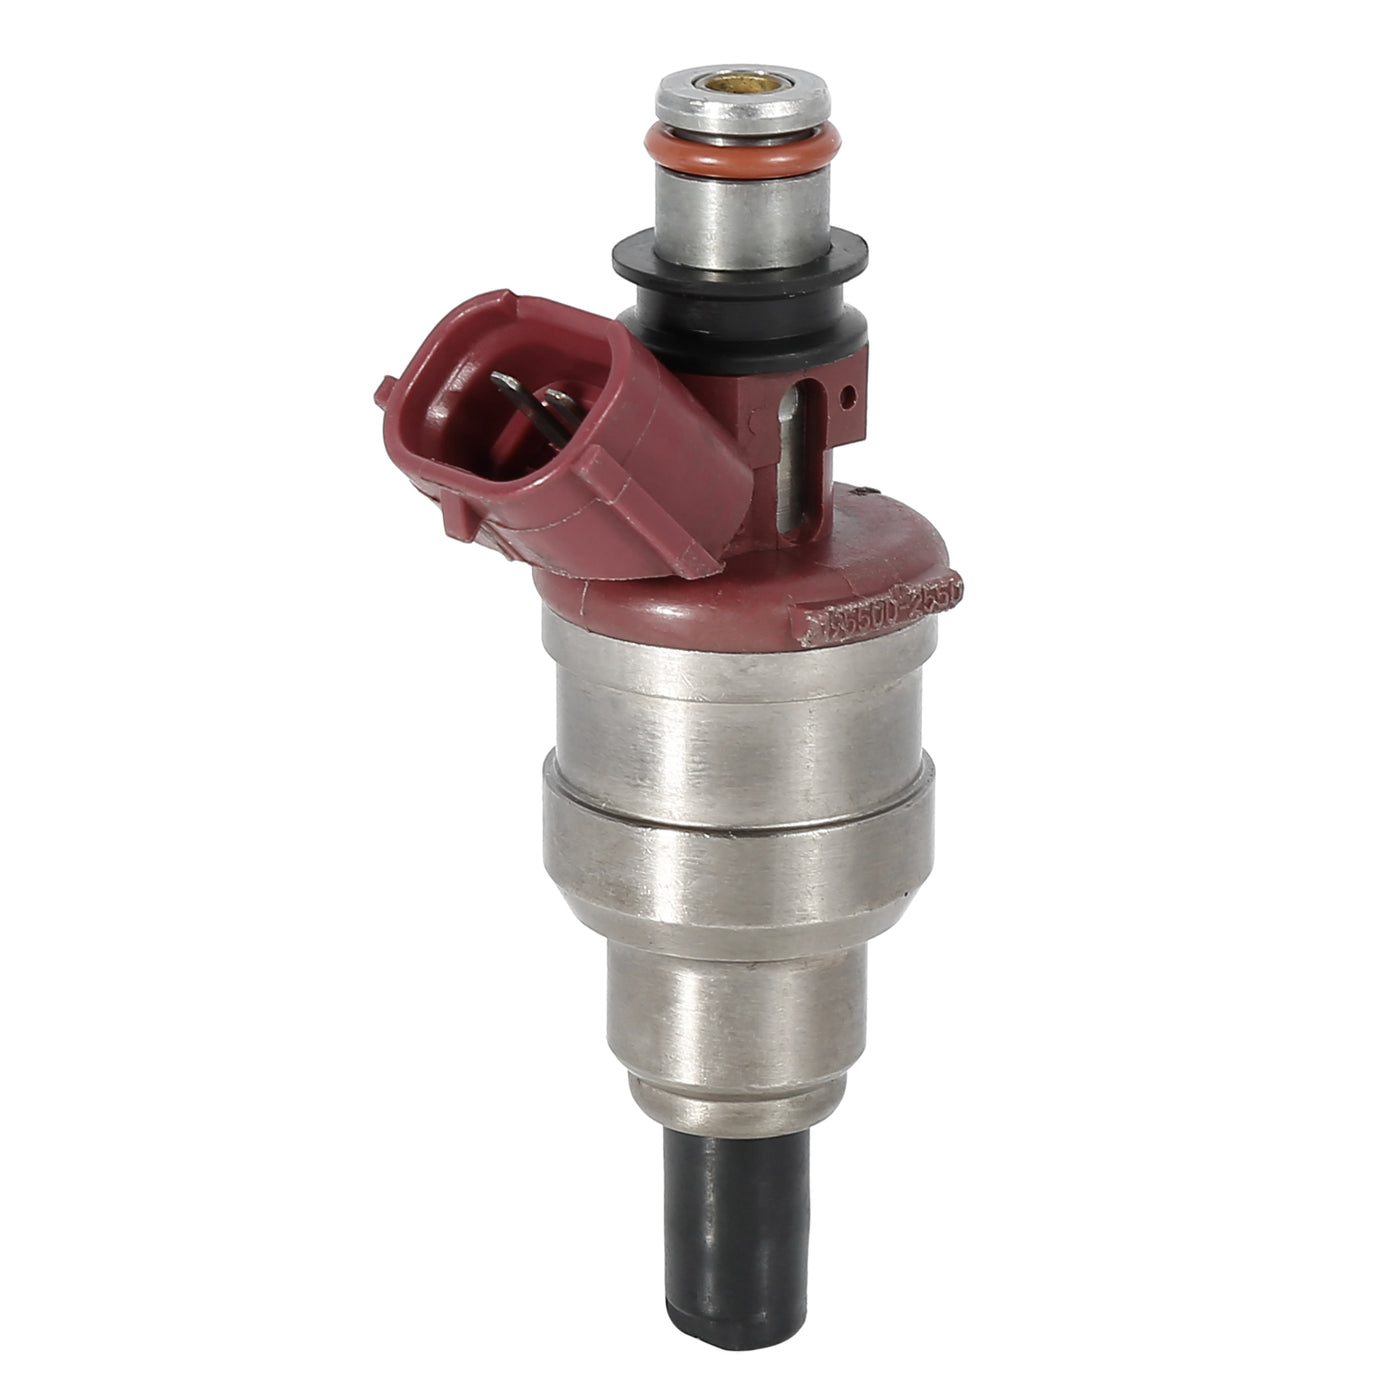 X AUTOHAUX 195500-2550 Automobile Fuel Injector Replacement for Daihatsu Silver Tone Red